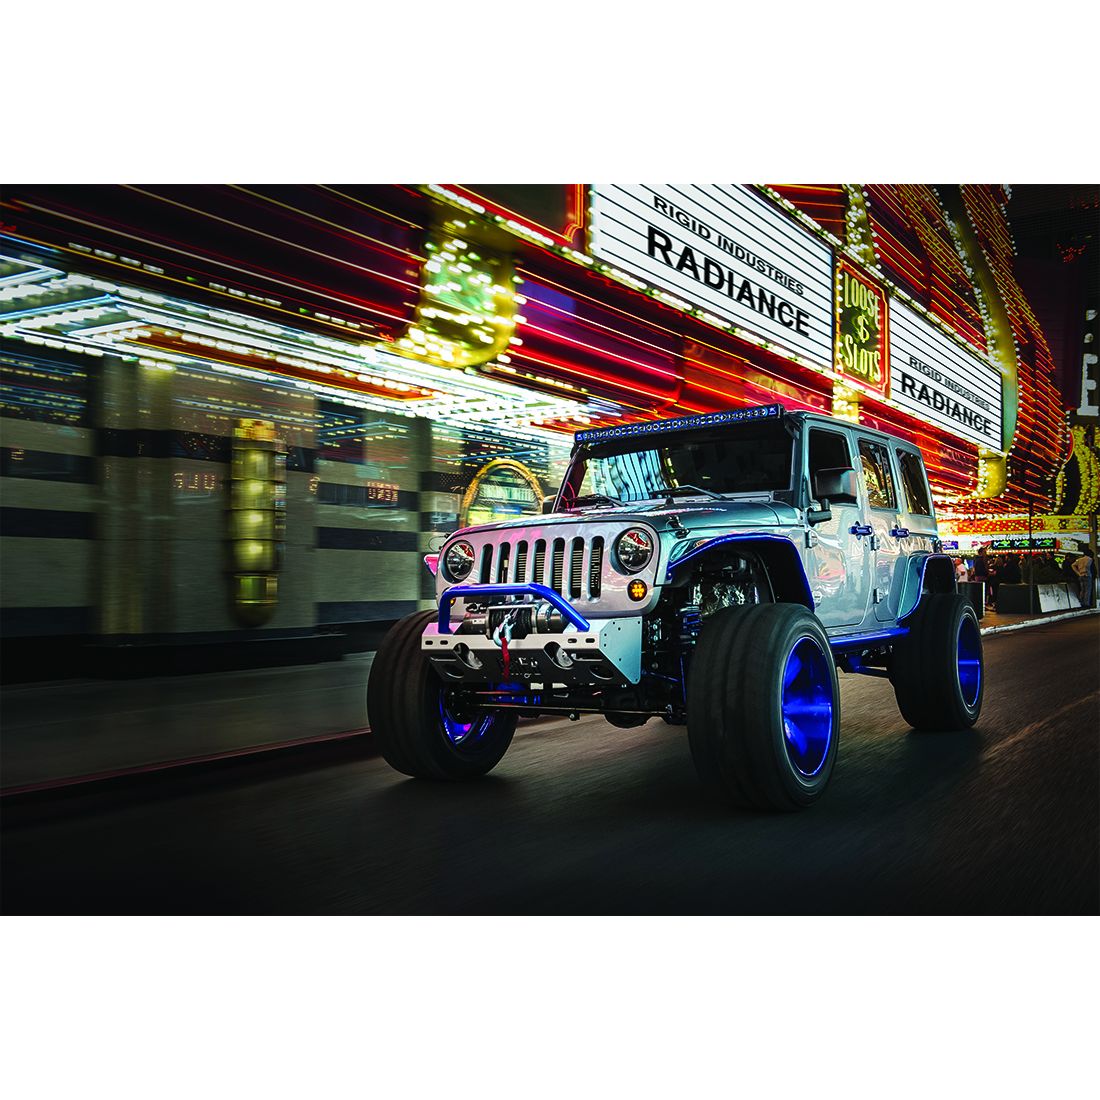 Rigid Industries 40 Inch Red Backlight Radiance Plus - Click Image to Close